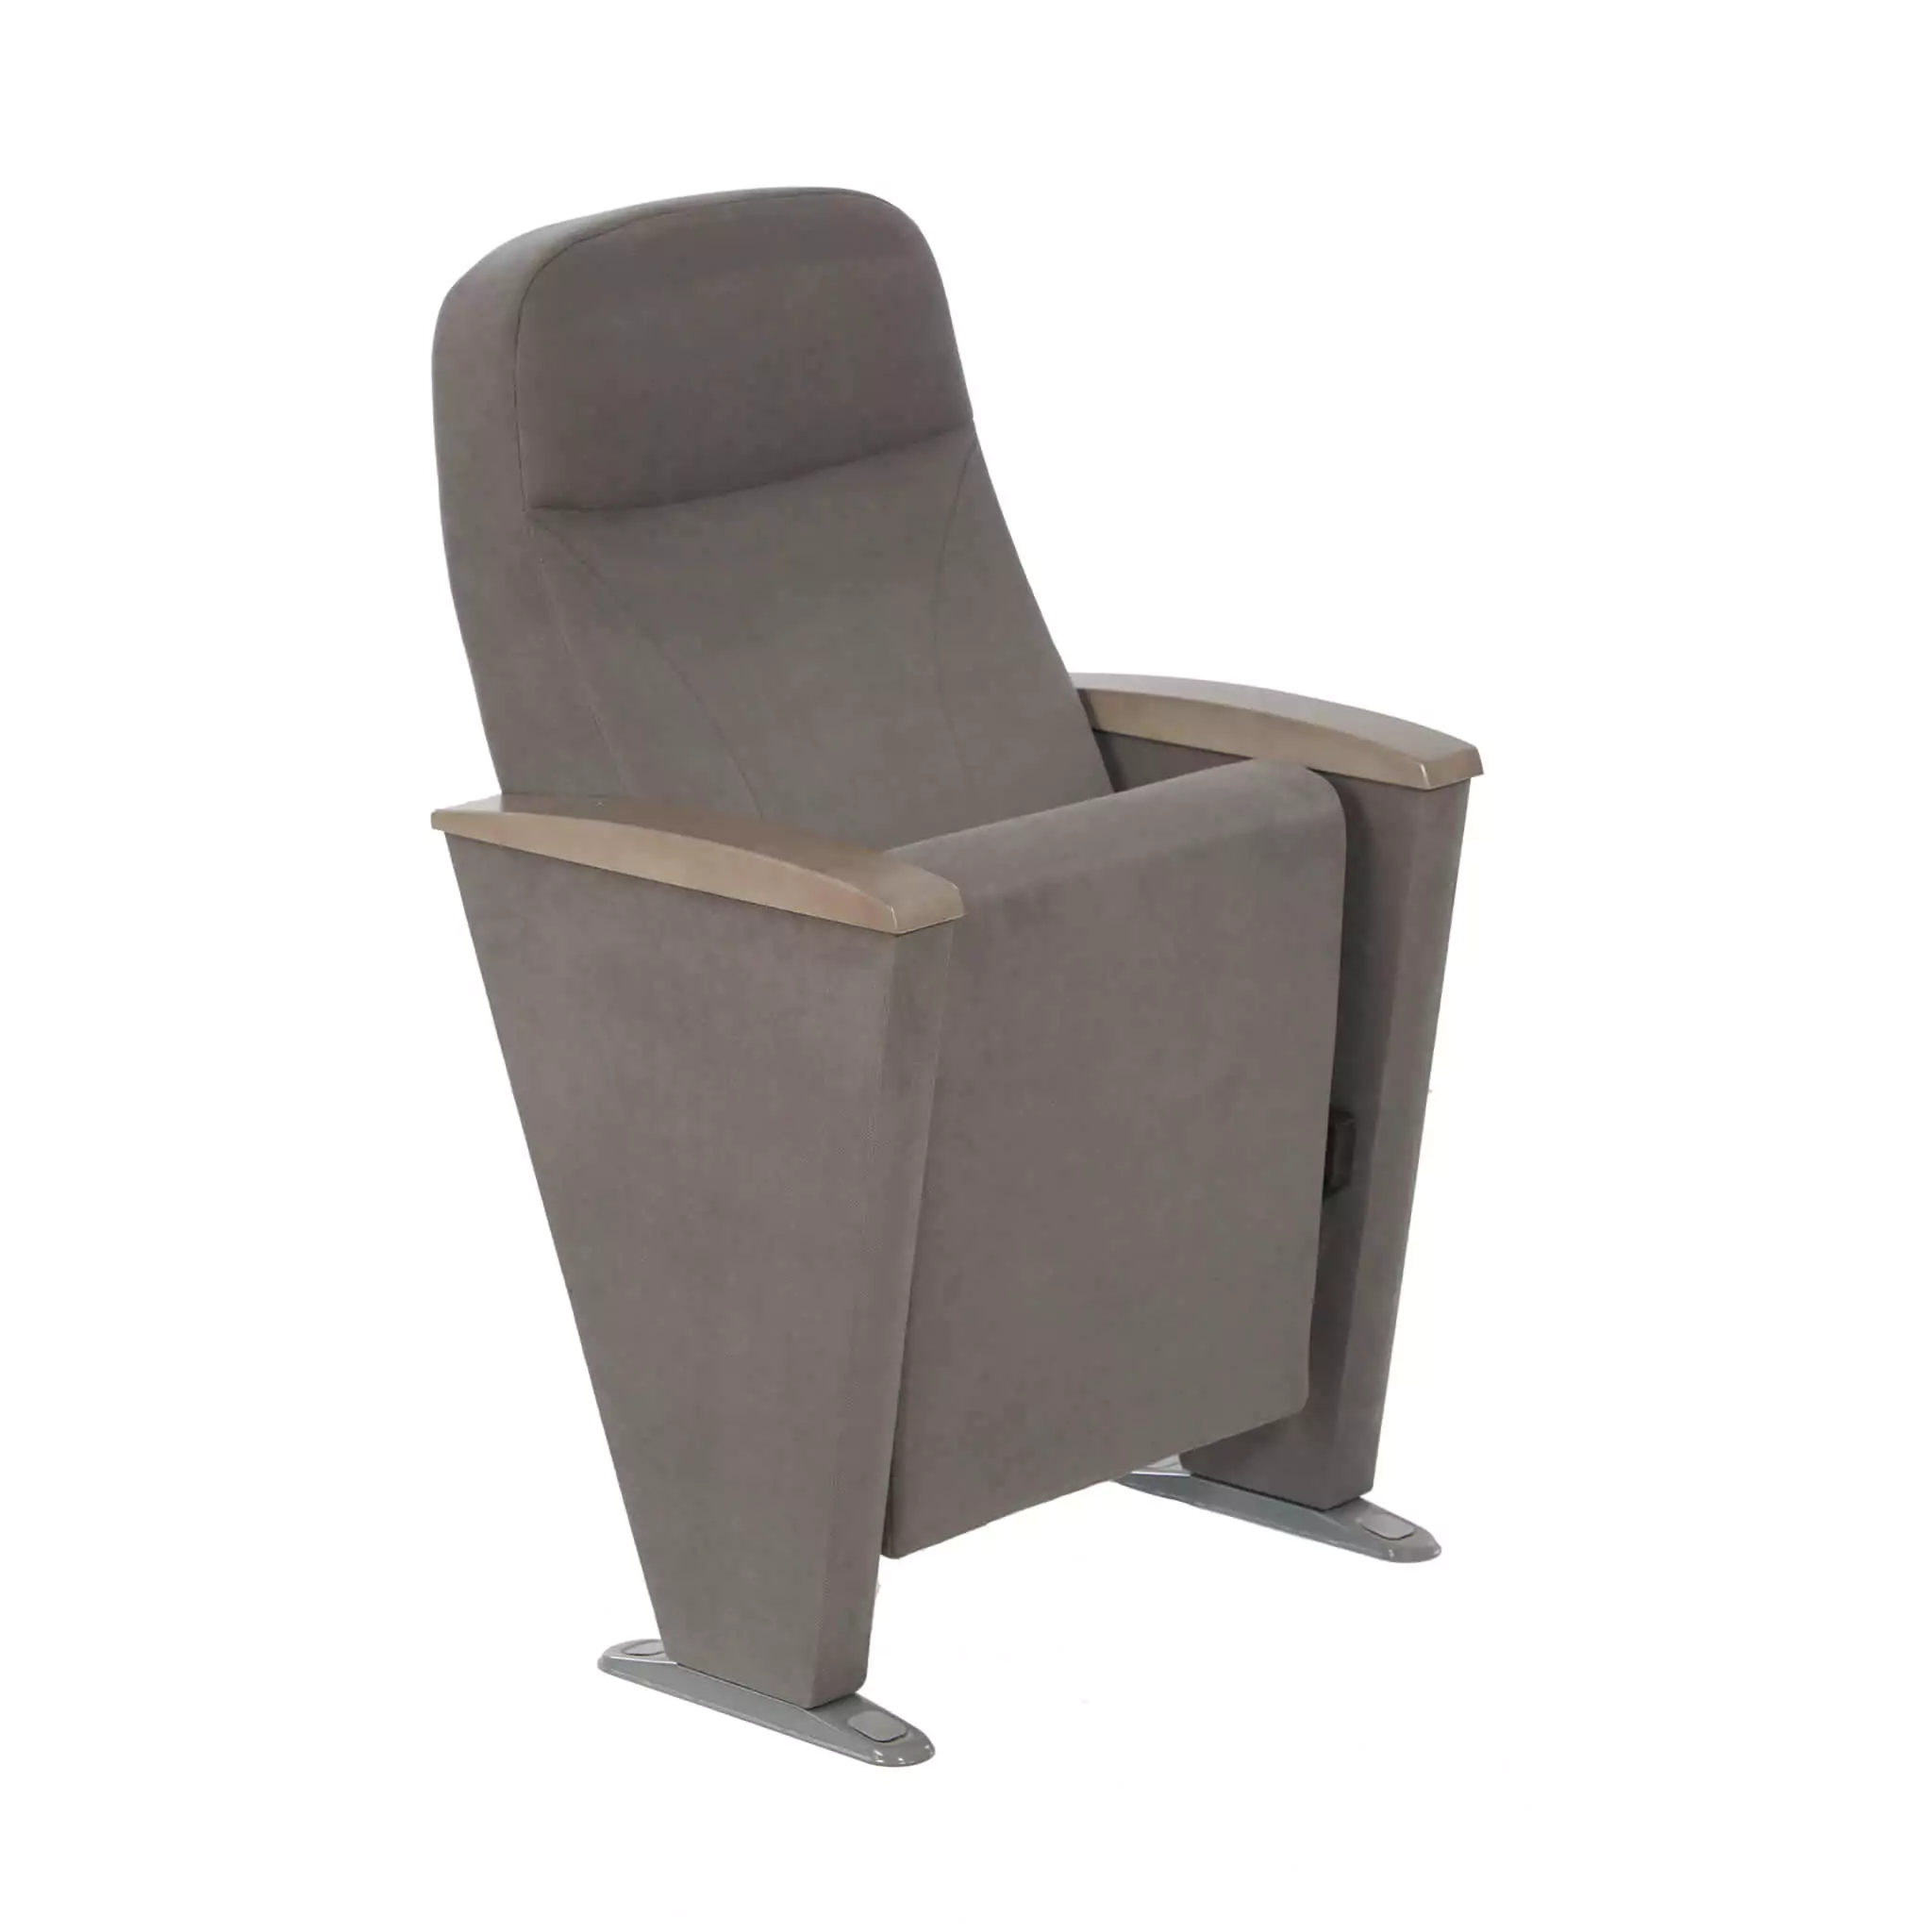 Simko Seating Products Conference Seat Suare V